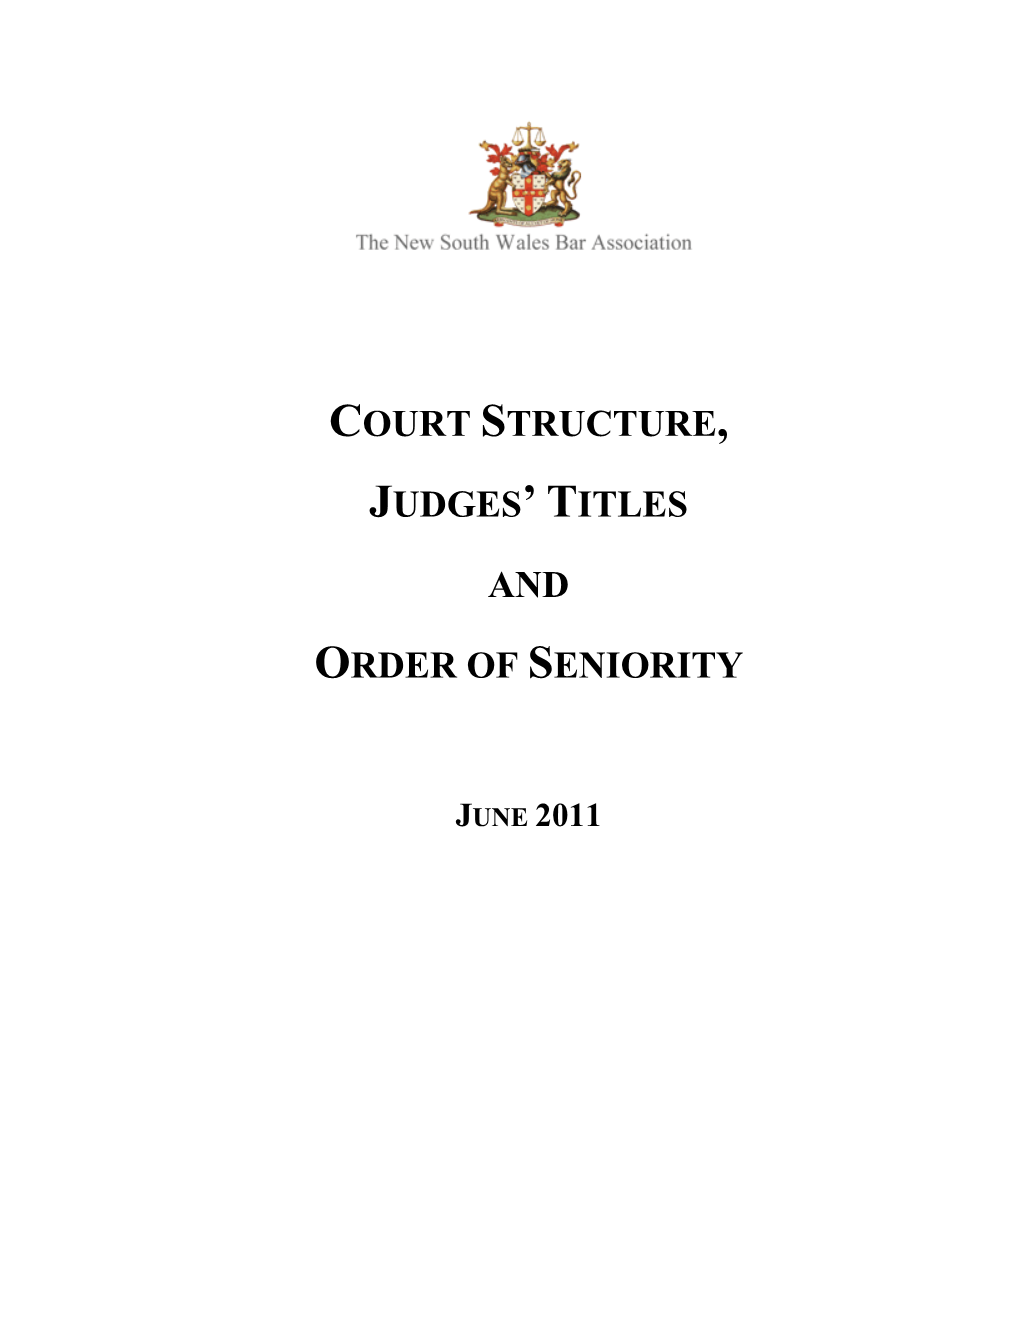 Court Structure, Judges' Titles and Order of Seniority